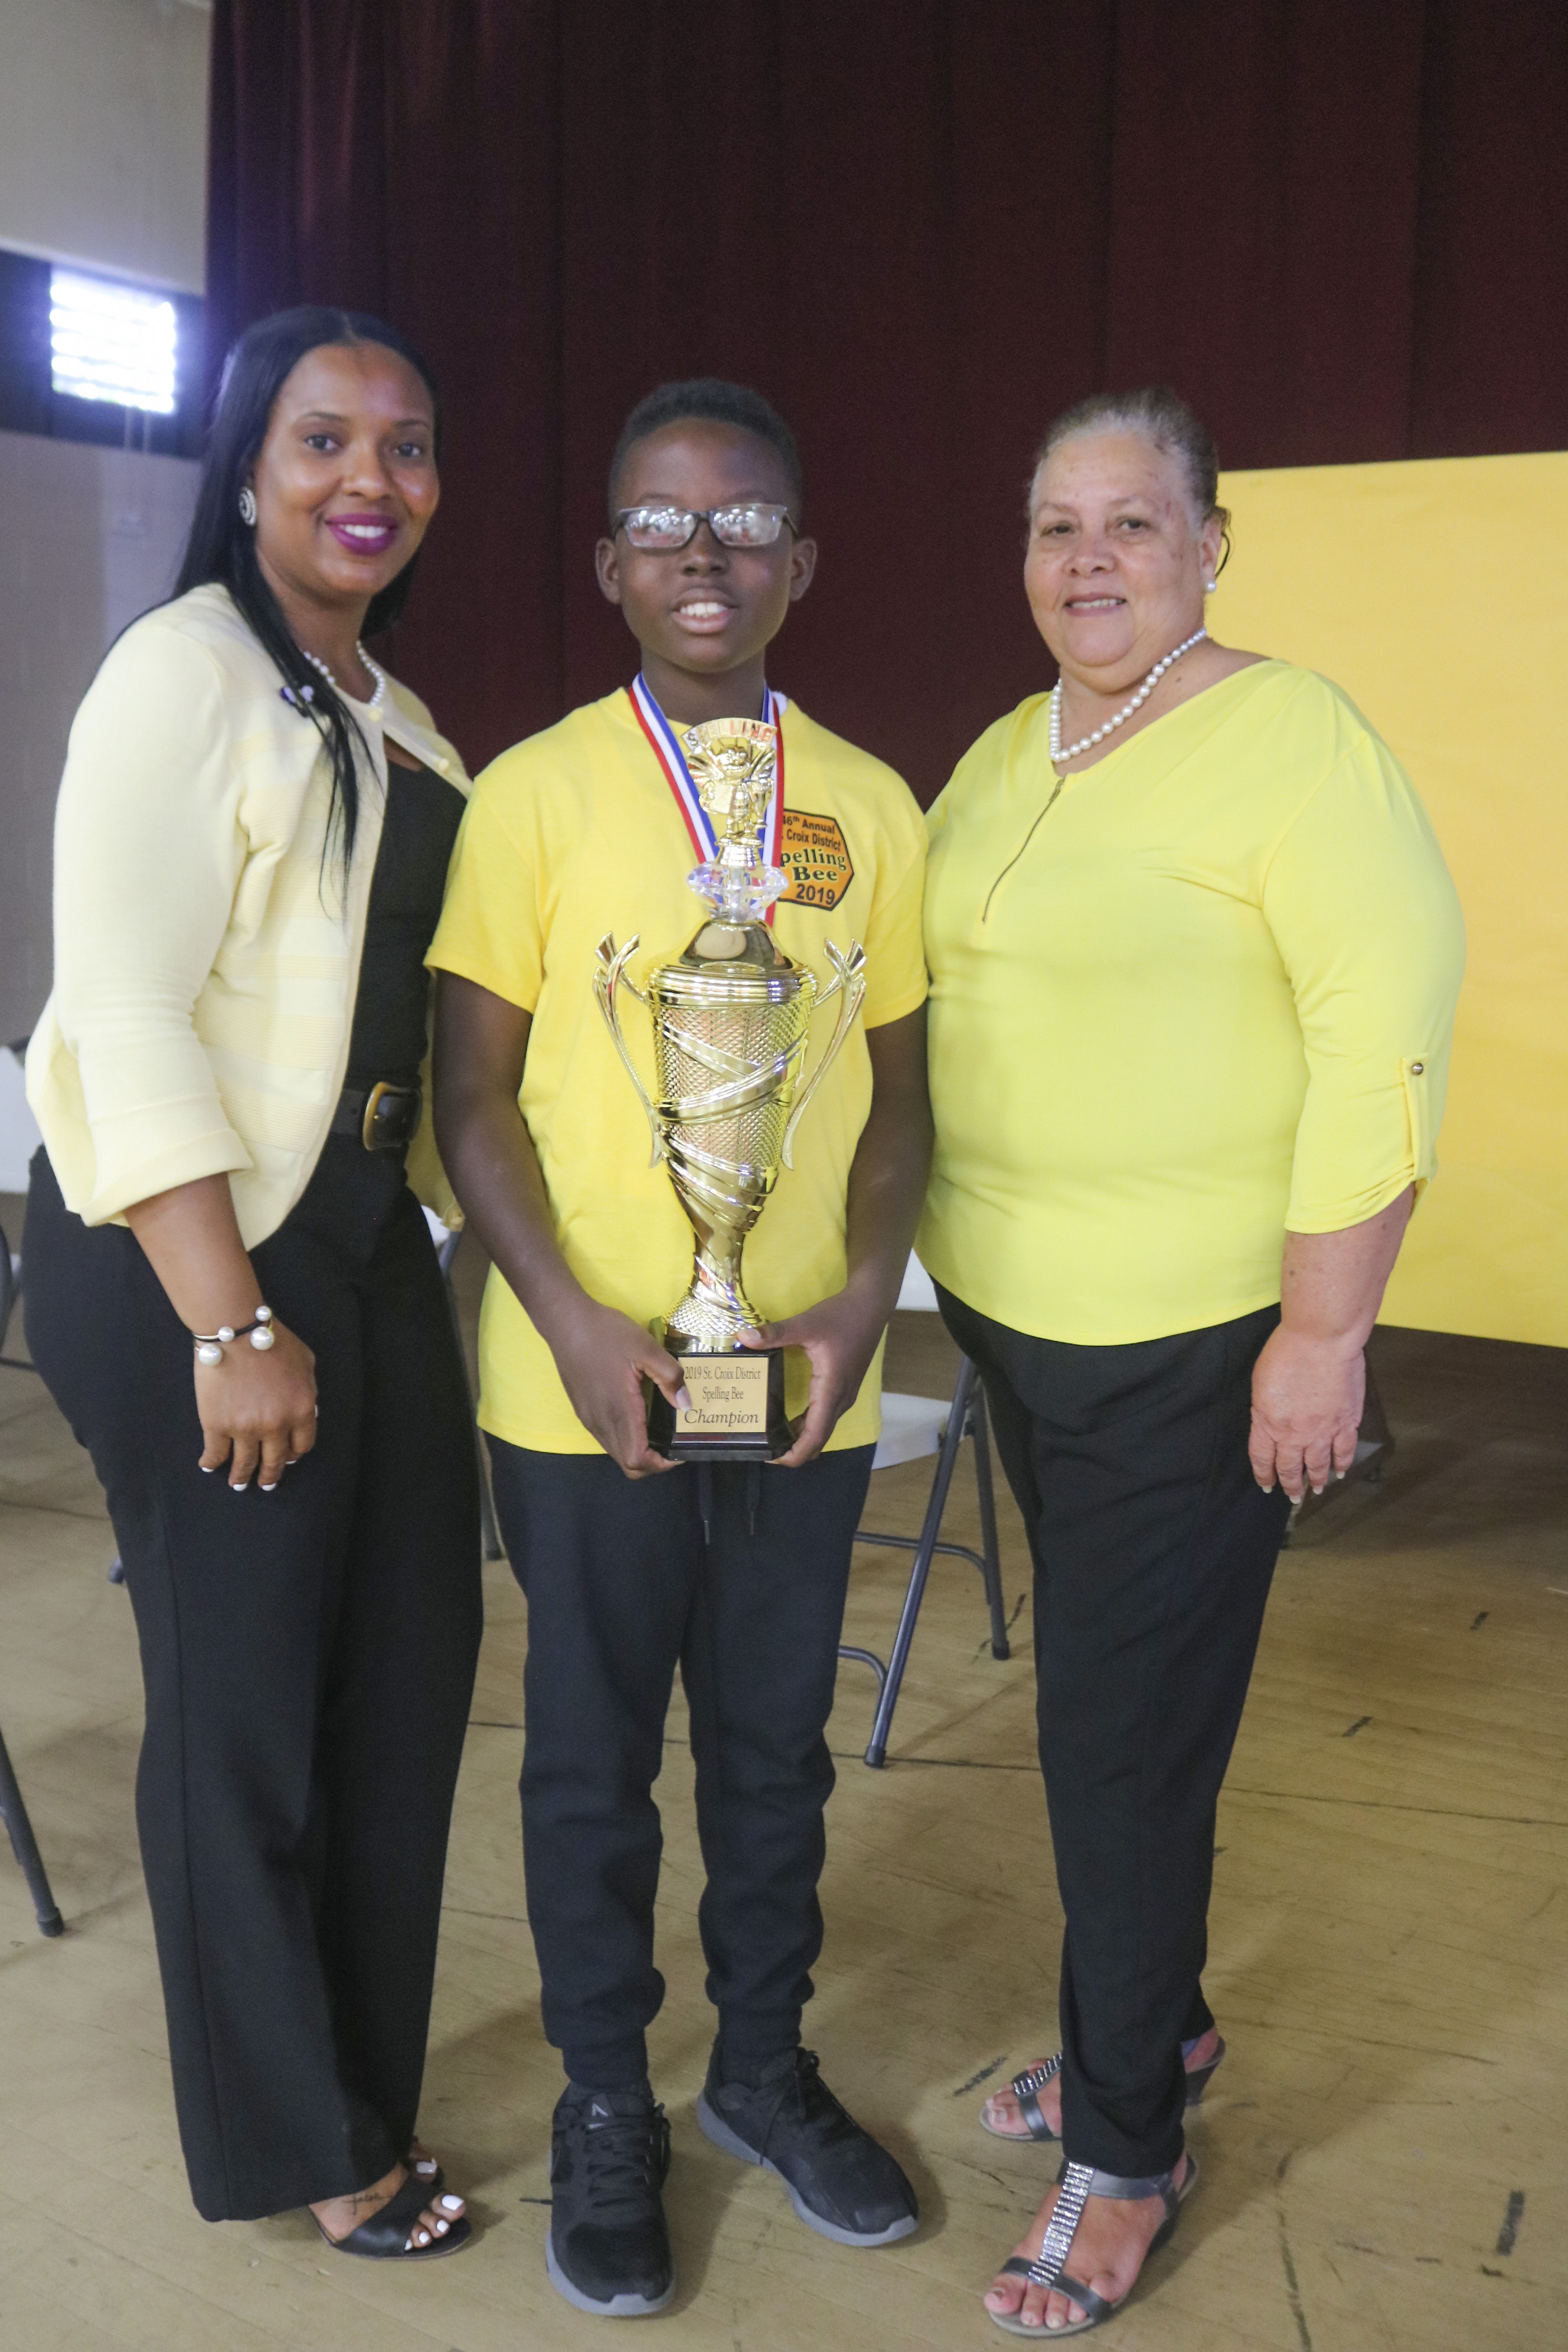 STX District Acting Deputy Superintendent Dr. Carla Bastian; STX District Spelling Bee Winner Michael Atwell and STX District Acting Insular Superintendent Maria Encarnacion.jpg